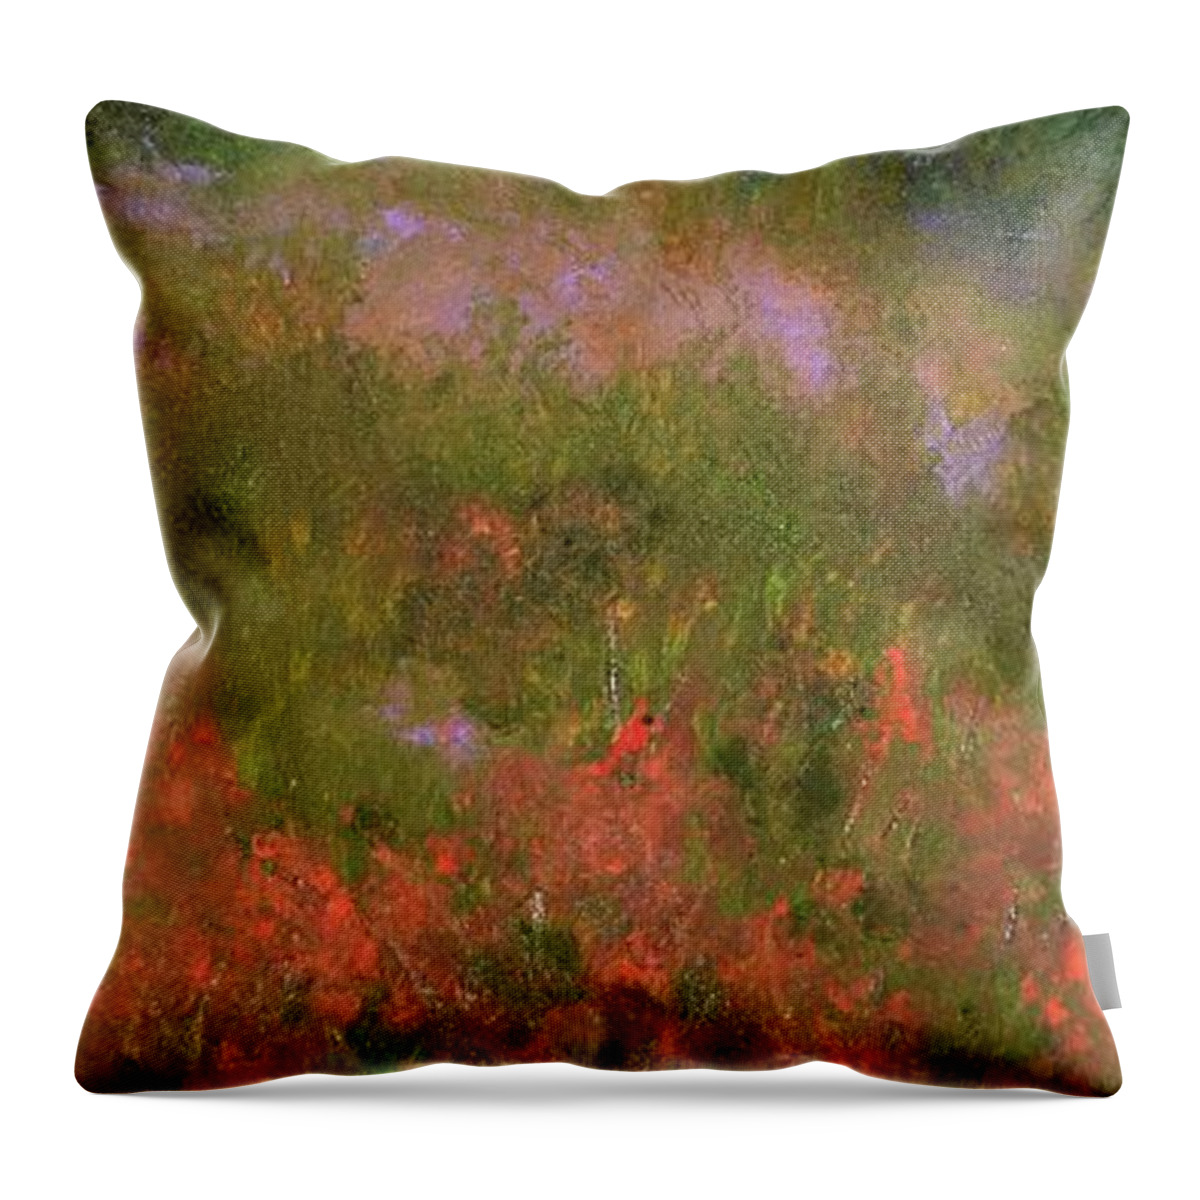  Throw Pillow featuring the painting Cardinal's Kingdom by Barrie Stark